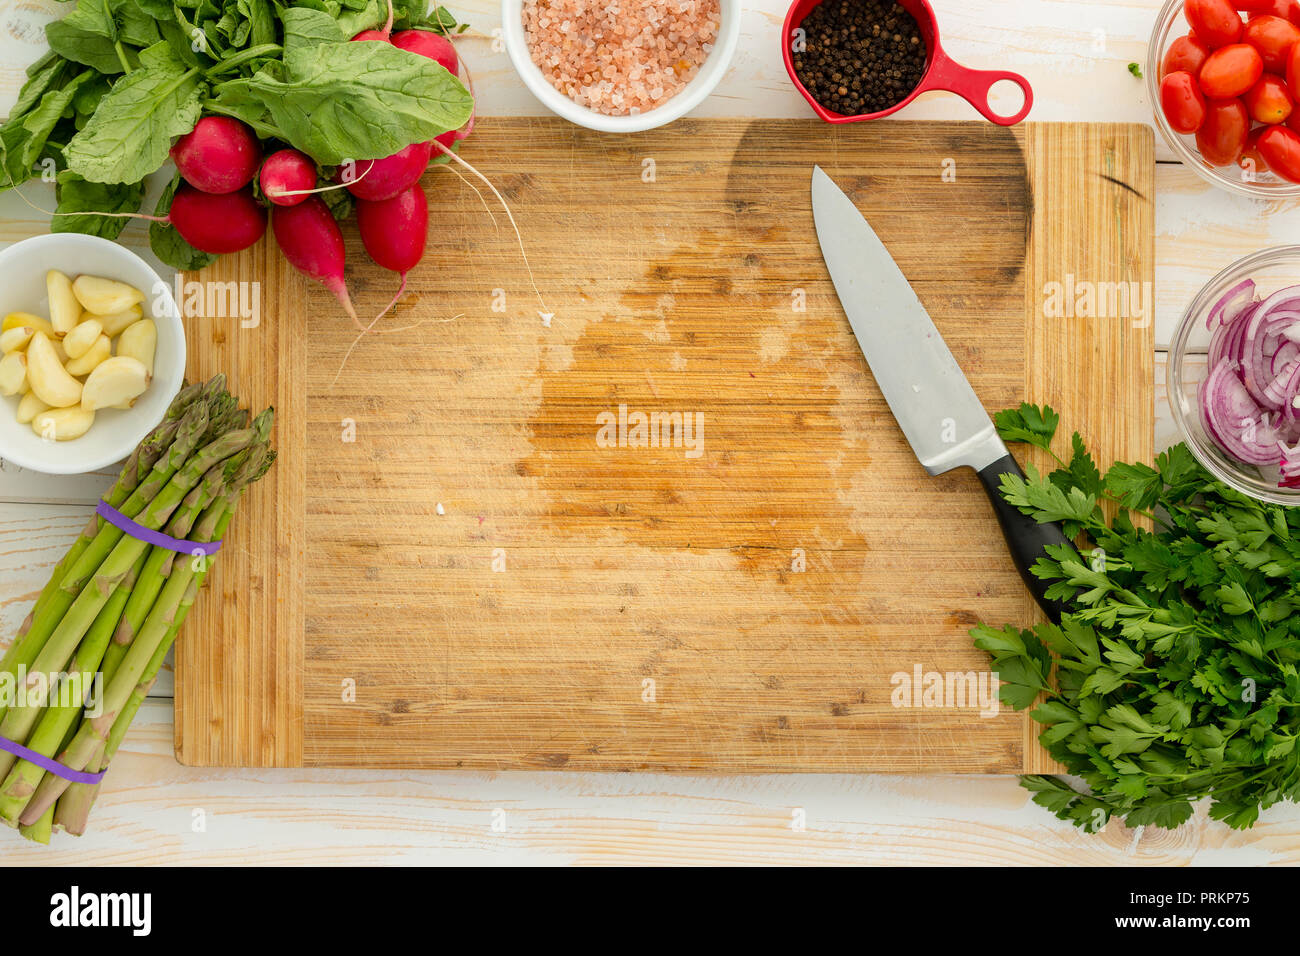 Overhead view of wooden cutting board surrounded by assorted vegetables including onion and asparagus with knife Stock Photo